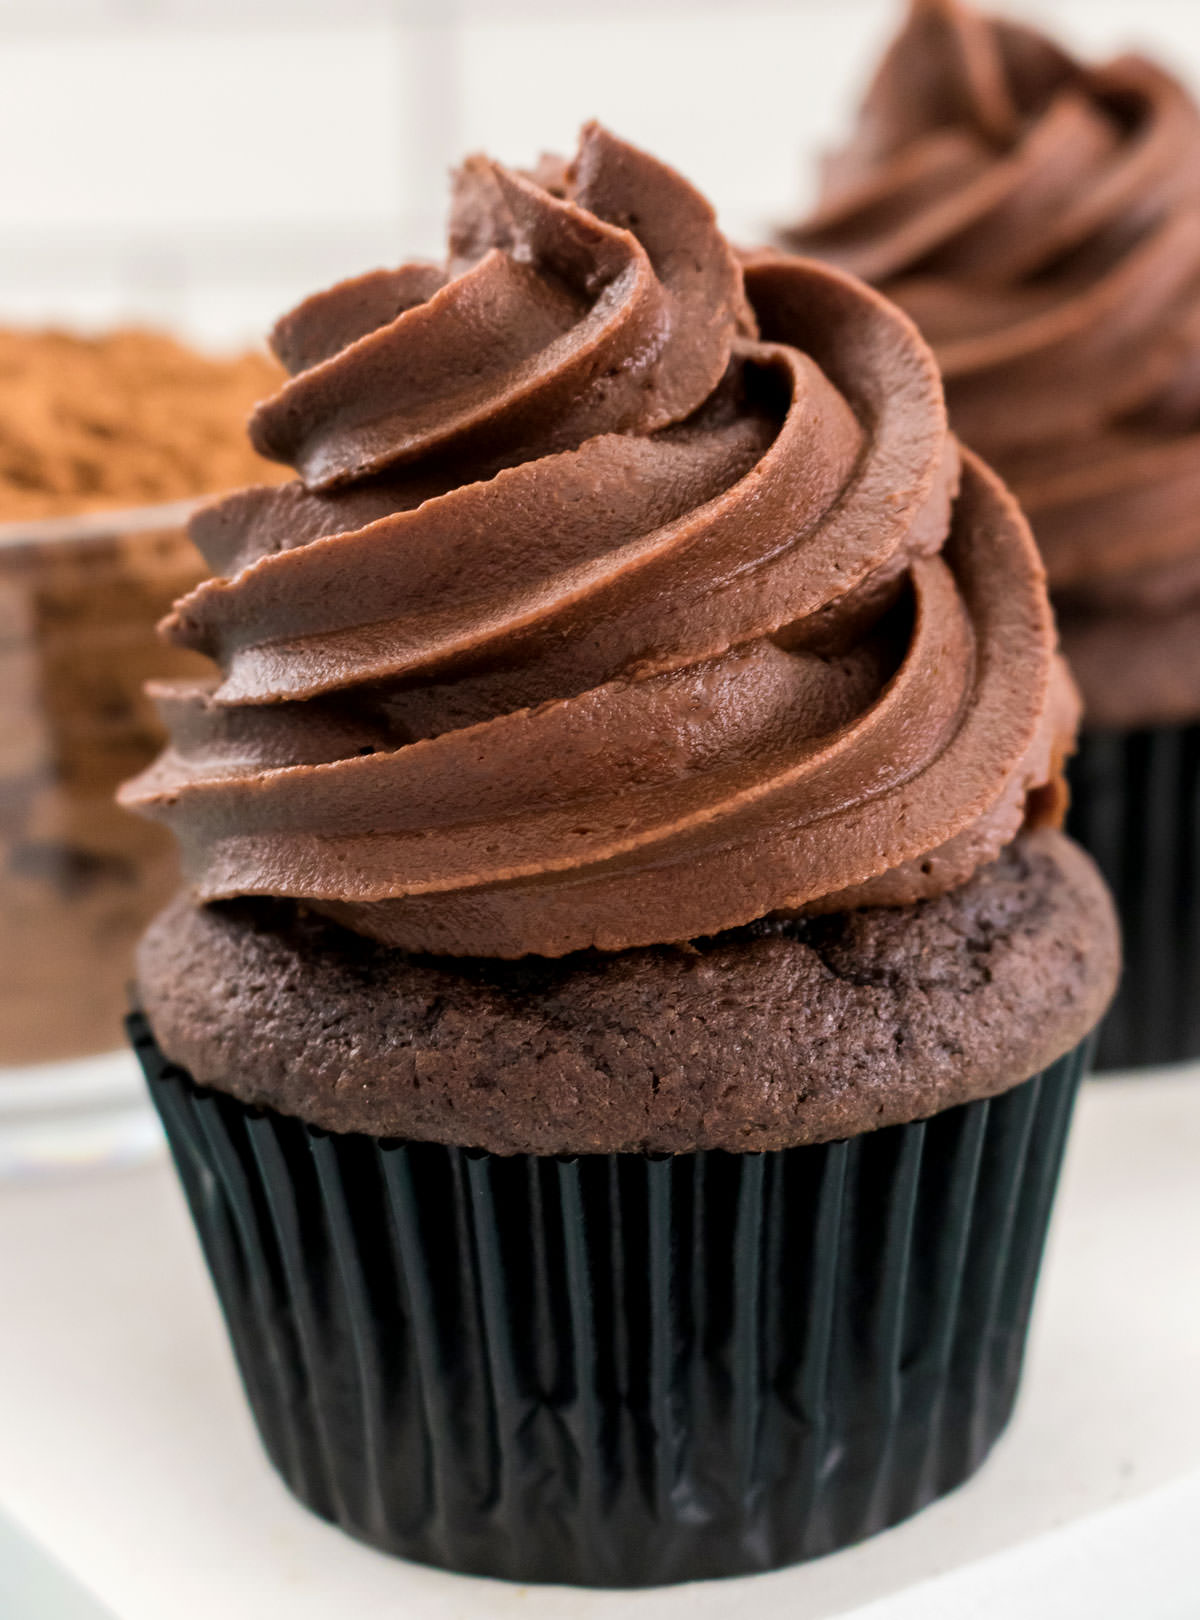 Closeup on a chocolate cupcake topped with a swirl of The Best Chocolate Buttercream Frosting sitting in front of a glass bowl filled with cocoa powder.